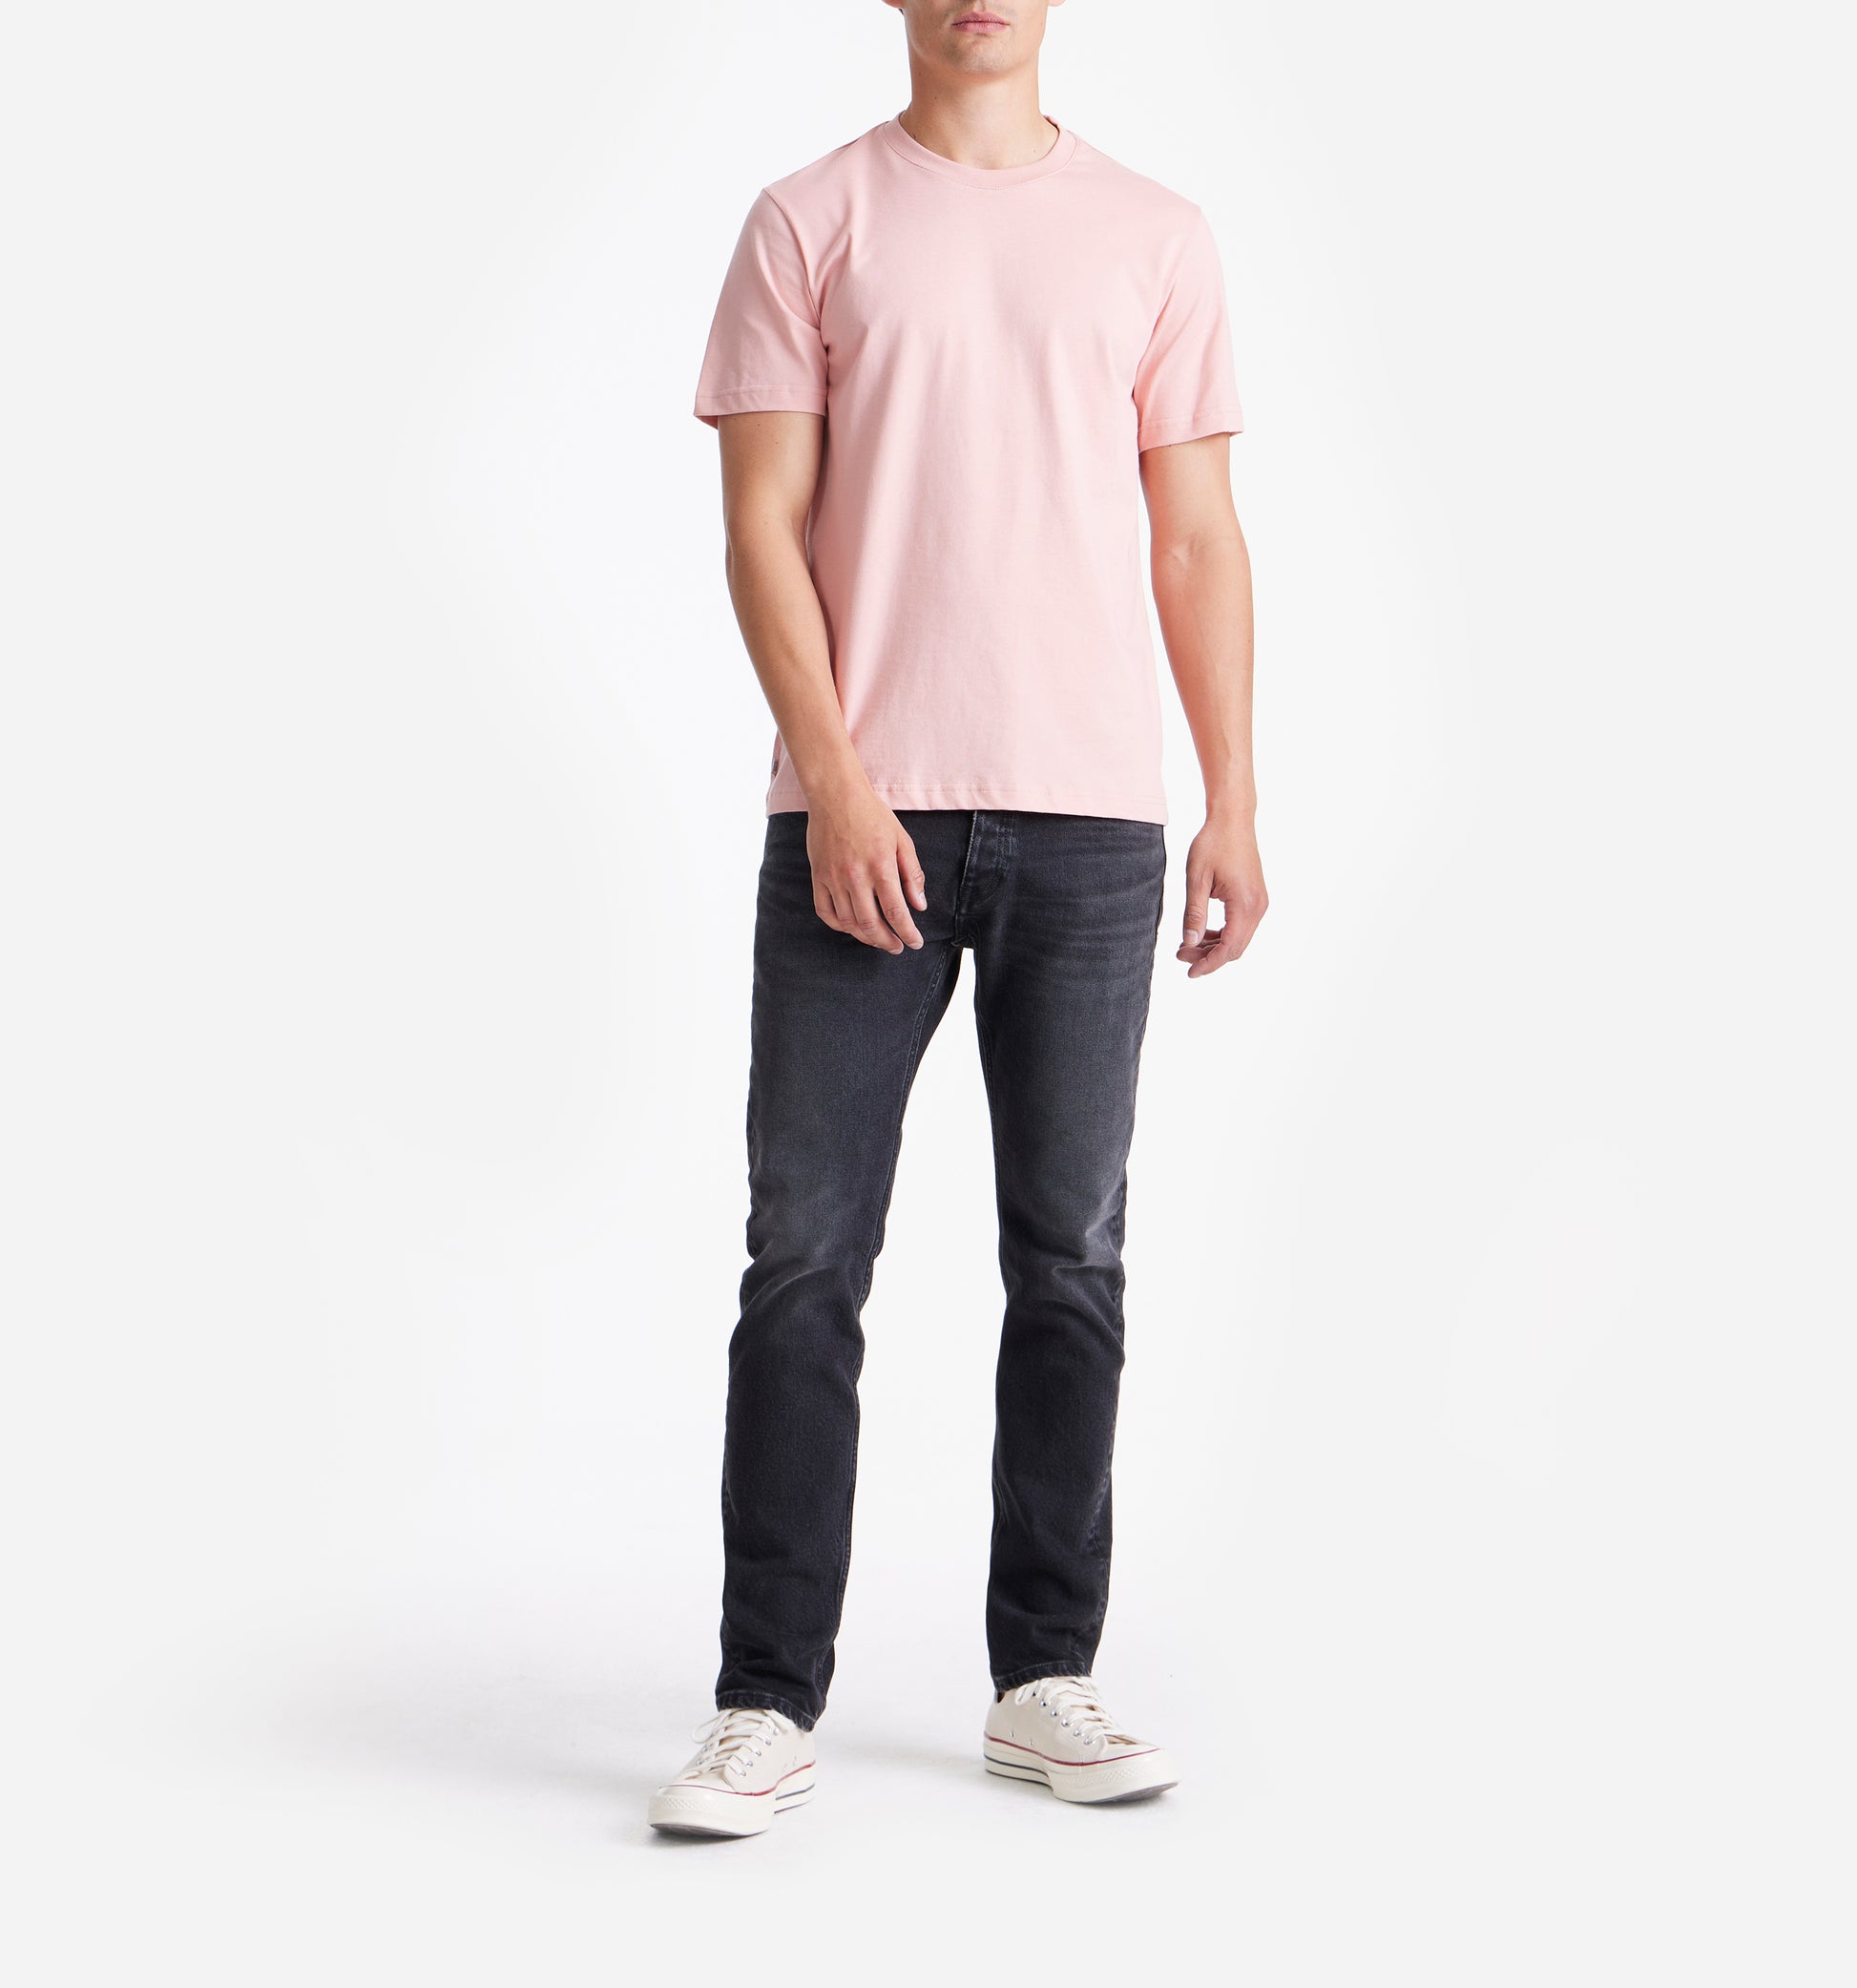 The Steve - Basic Cotton T-shirt In Dark Pink From King Essentials